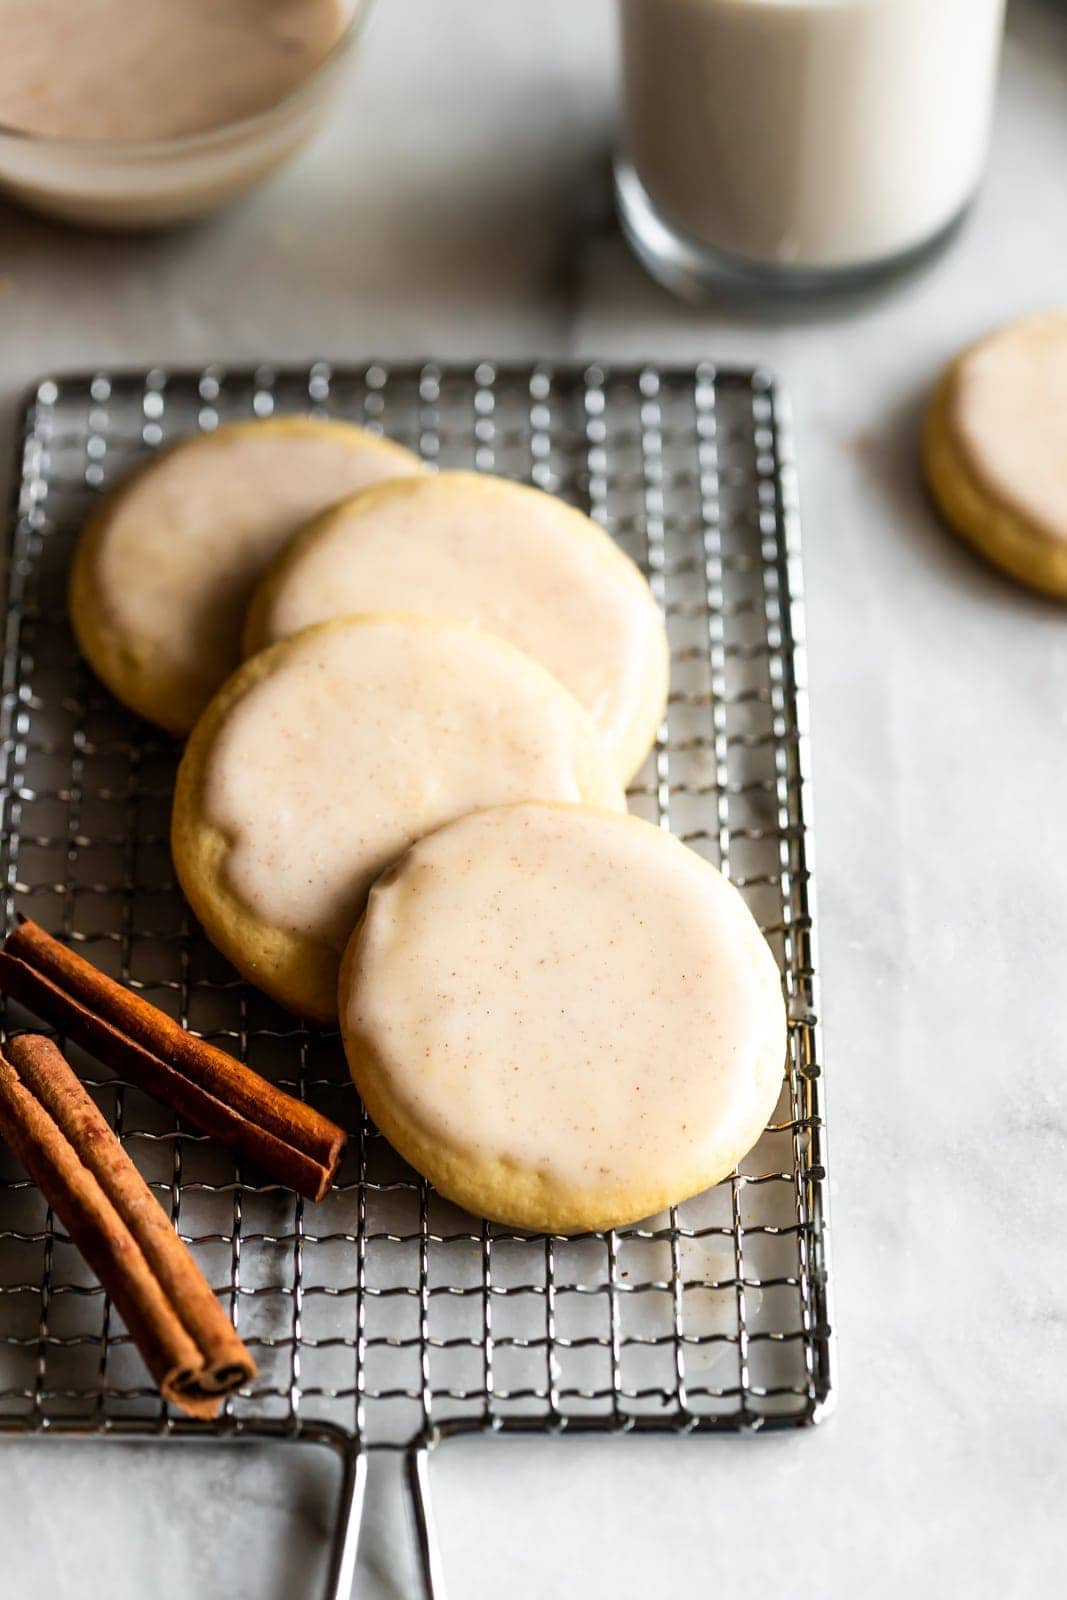 Soft, cut-out sugar cookies topped with a coquito (Puertorican eggnog) icing made with full-fat coconut milk, cinnamon, and rum.